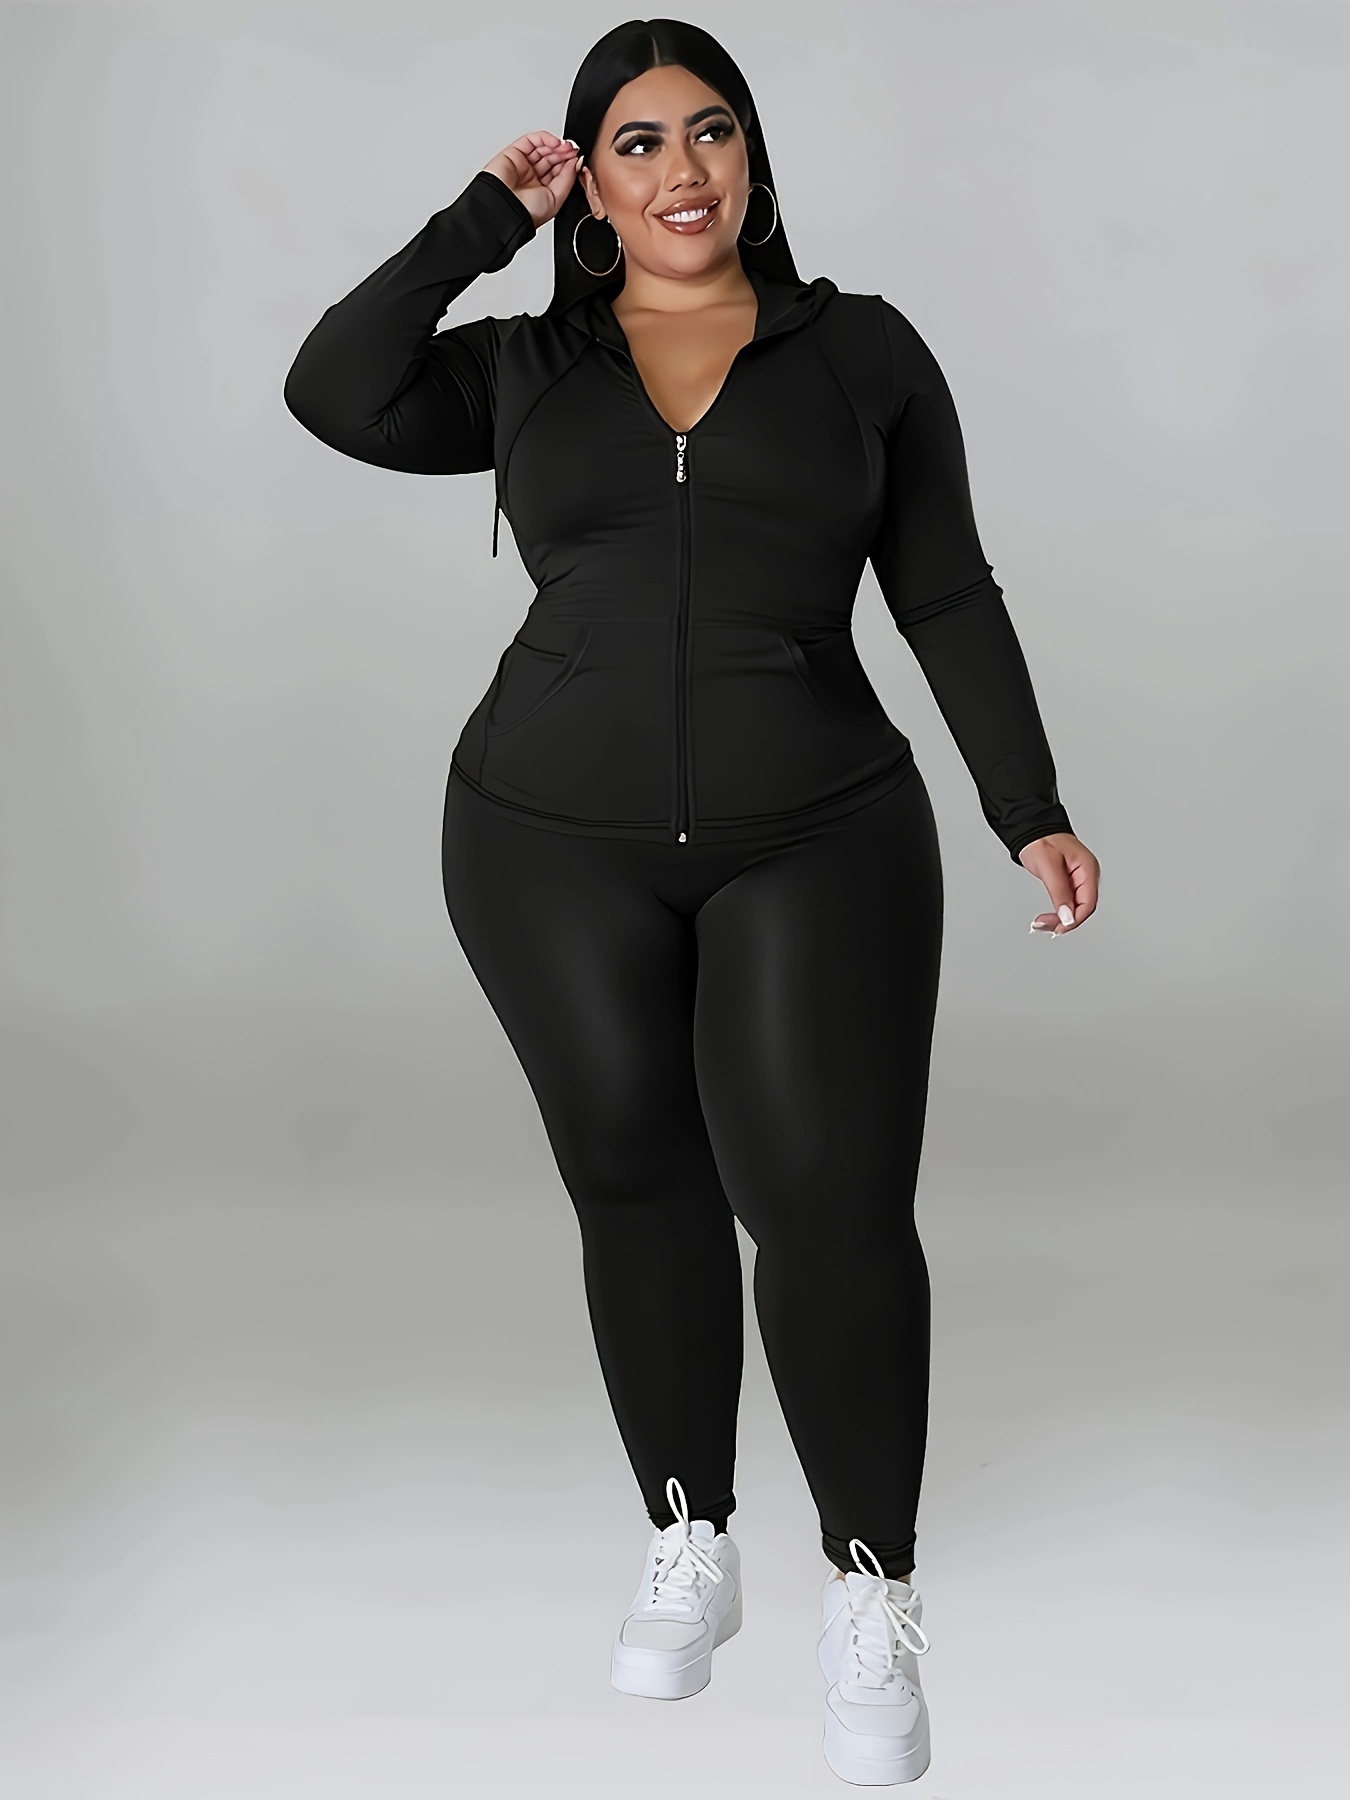 Dropship Plus Size Hoodie Drawstring Sweatshirt & Sweatpants Set; Women's  Plus Solid Medium Stretch Casual 2pcs Set Outfits to Sell Online at a Lower  Price